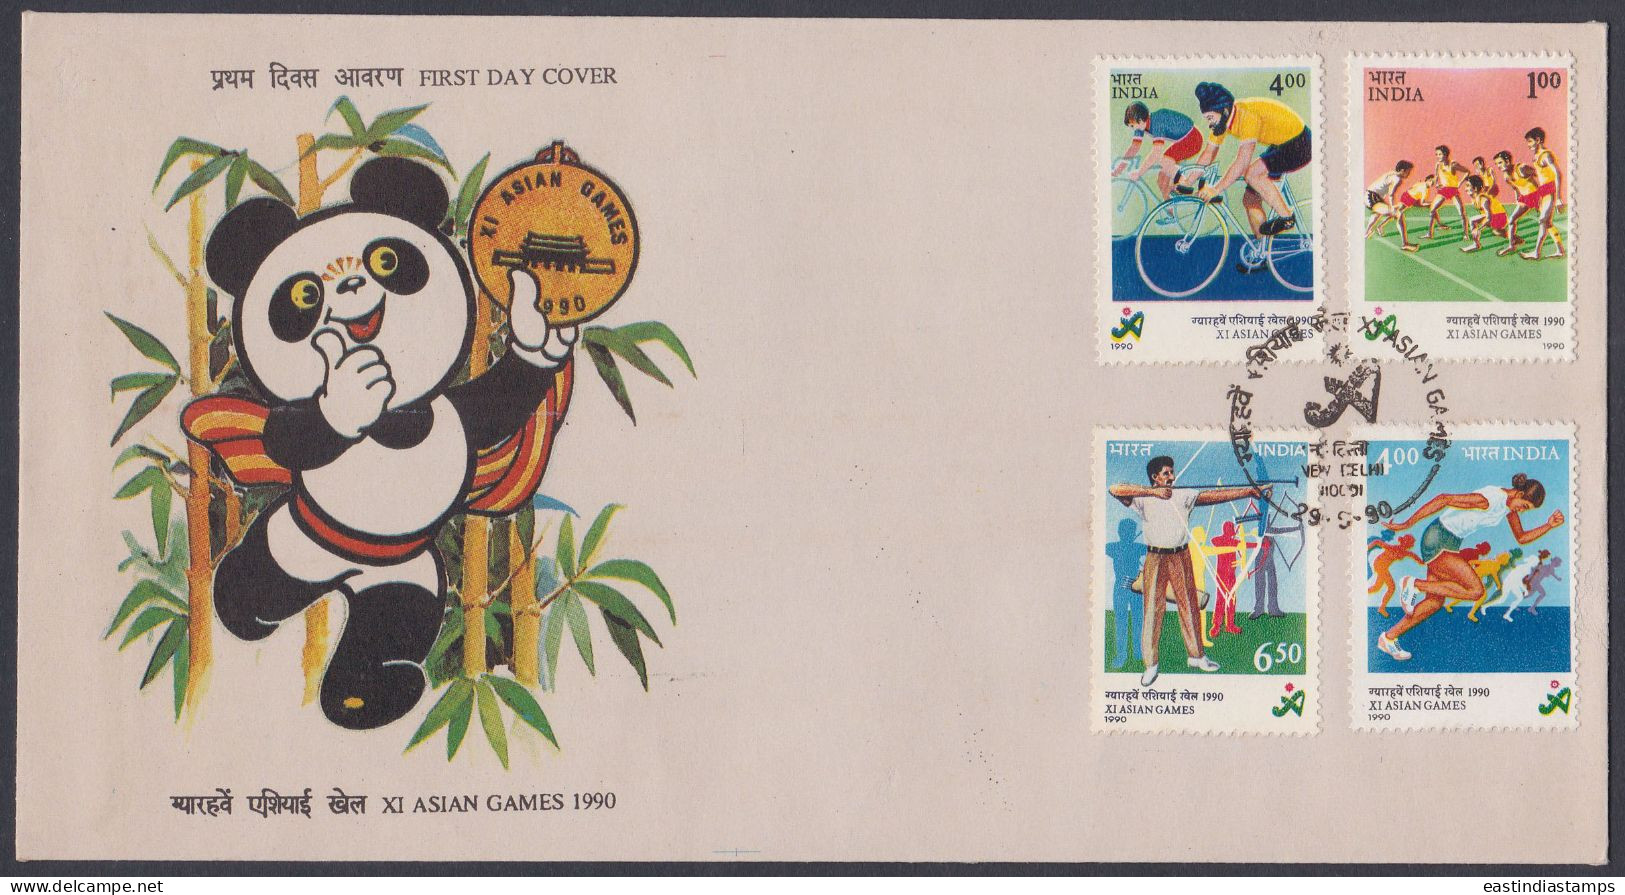 Inde India 1990 FDC Asian Games, Panda, Cycling, Cycle, Archery, Kabaddi, Athletics, Sport, Sports, First Day Cover - Storia Postale